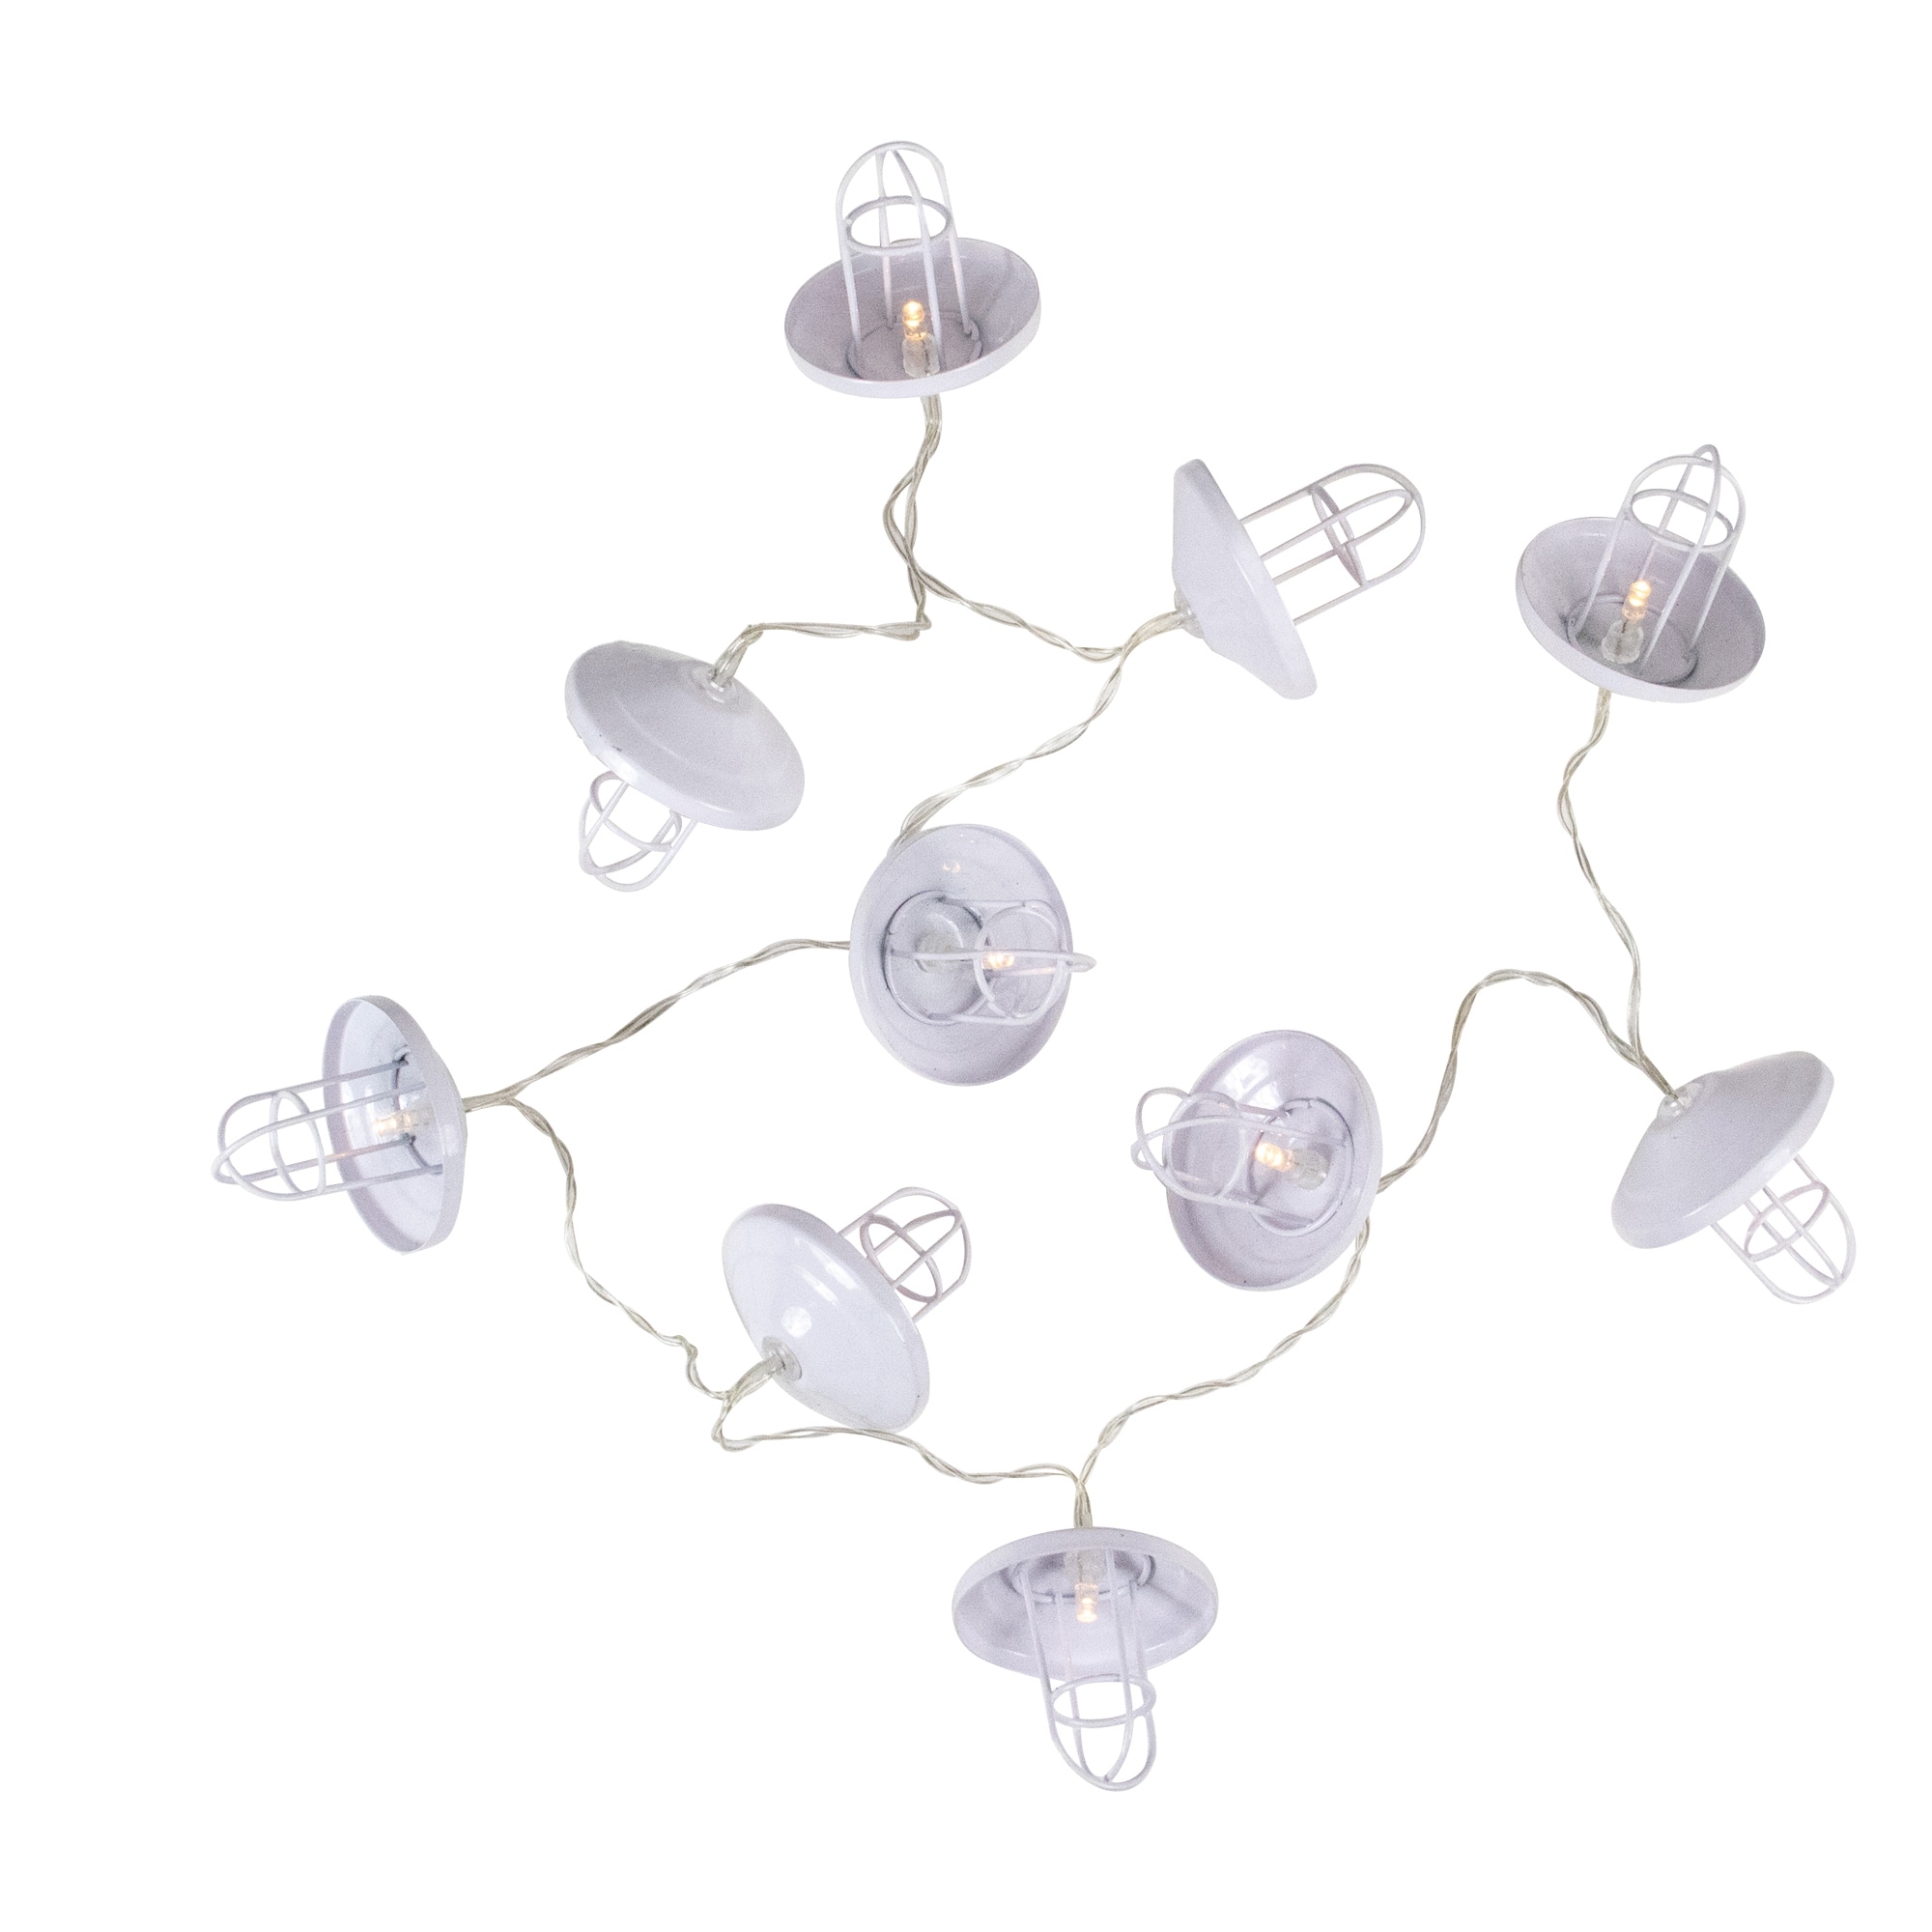 10 B/O LED Warm White Garland Christmas Lights - 3.25 ft Clear Wire - Bed  Bath & Beyond - 32265301